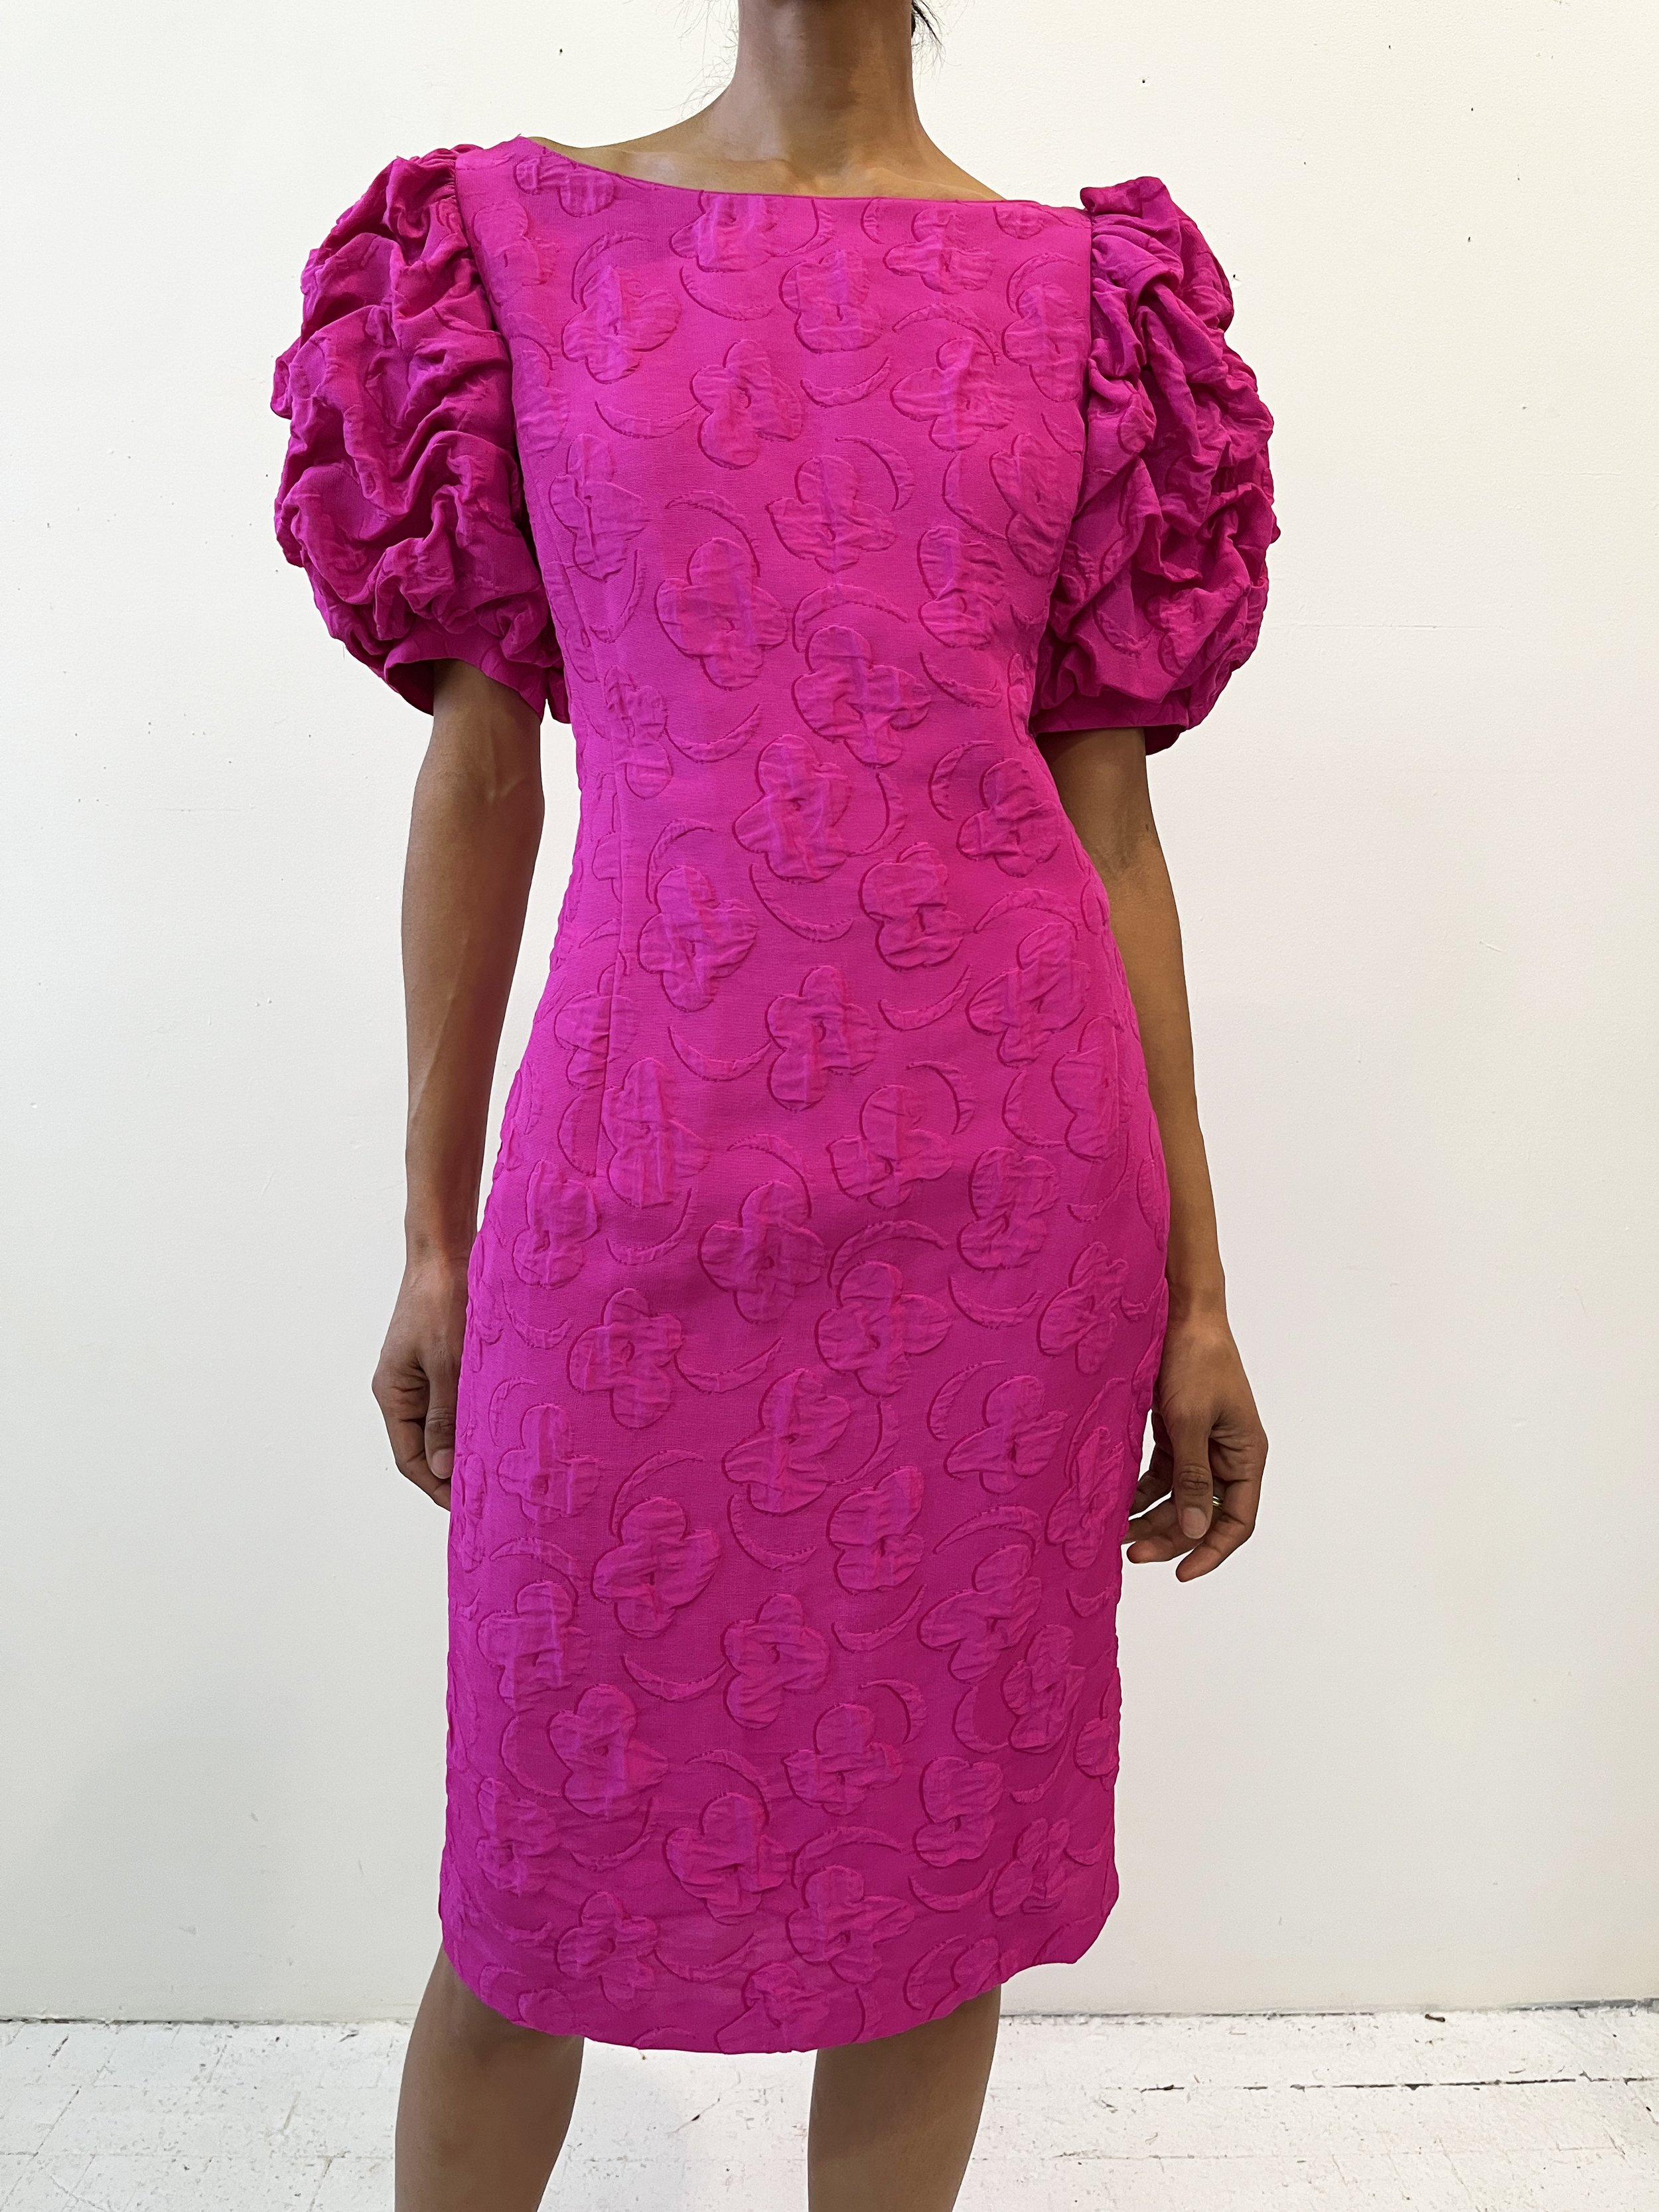 Louis Vuitton Pink Dress - 18 For Sale on 1stDibs